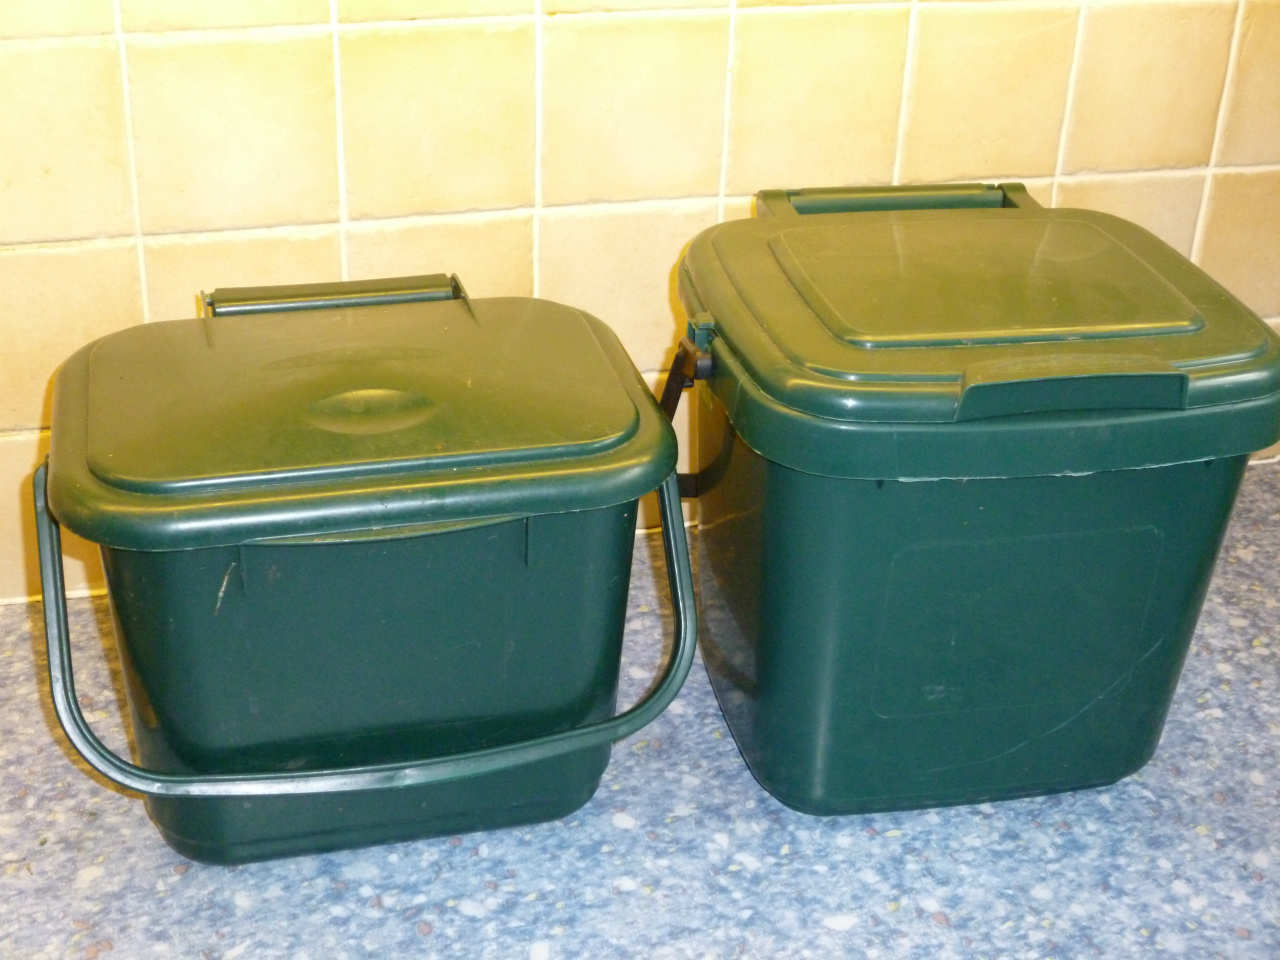 Charcoal Grey Compost Caddy/Bin for Food Waste Recycling&50x6L Compostable Bags 